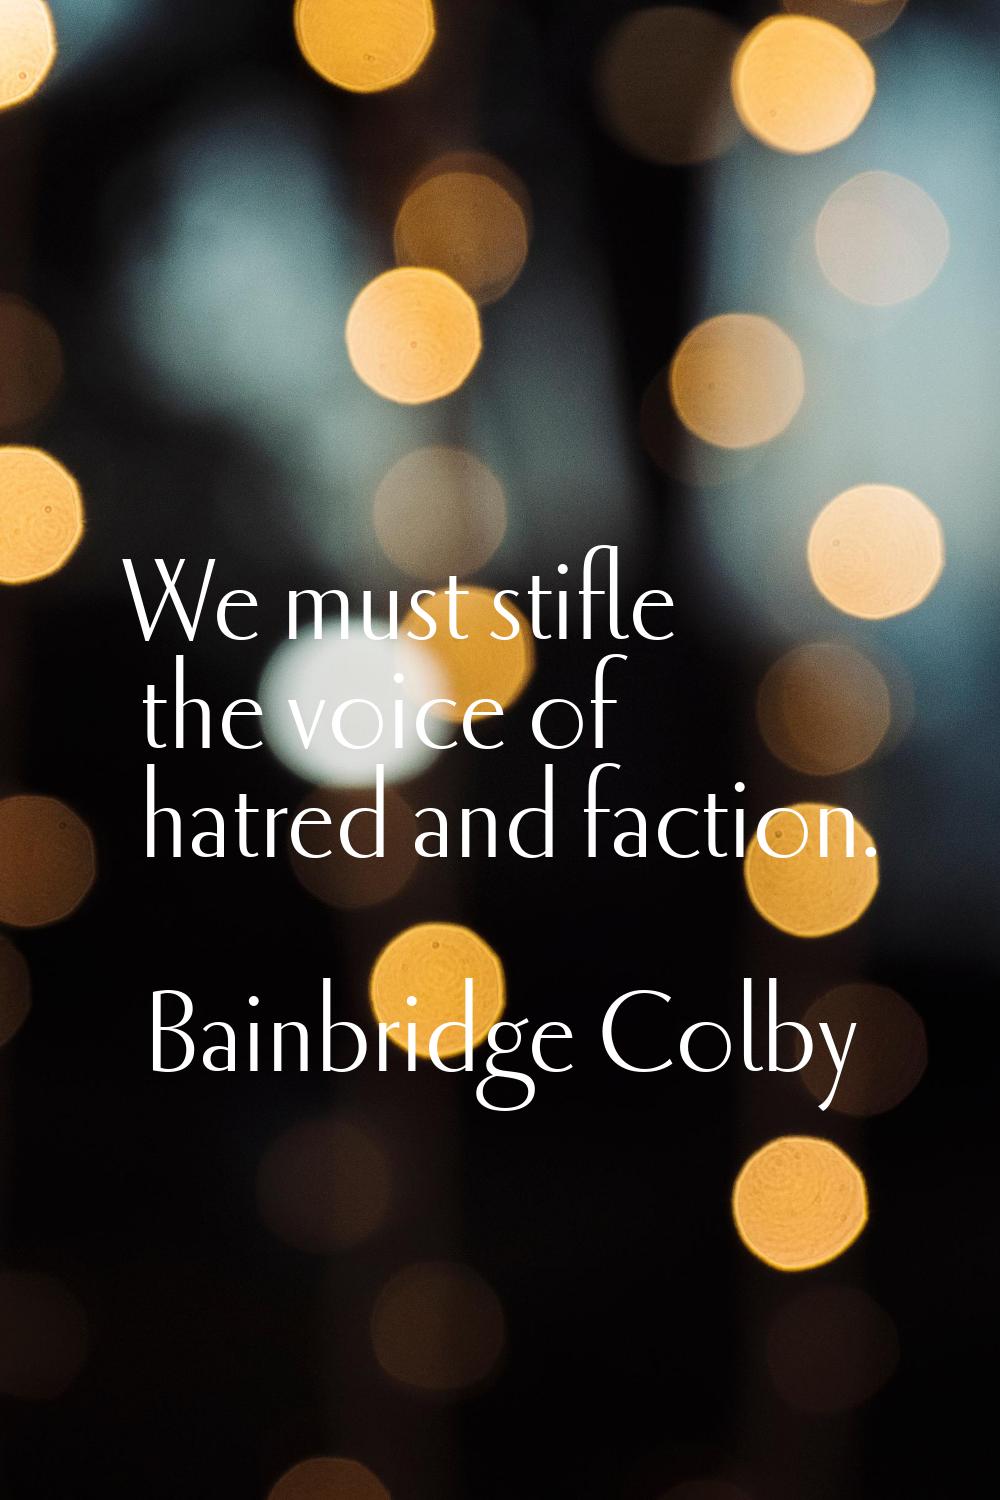 We must stifle the voice of hatred and faction.